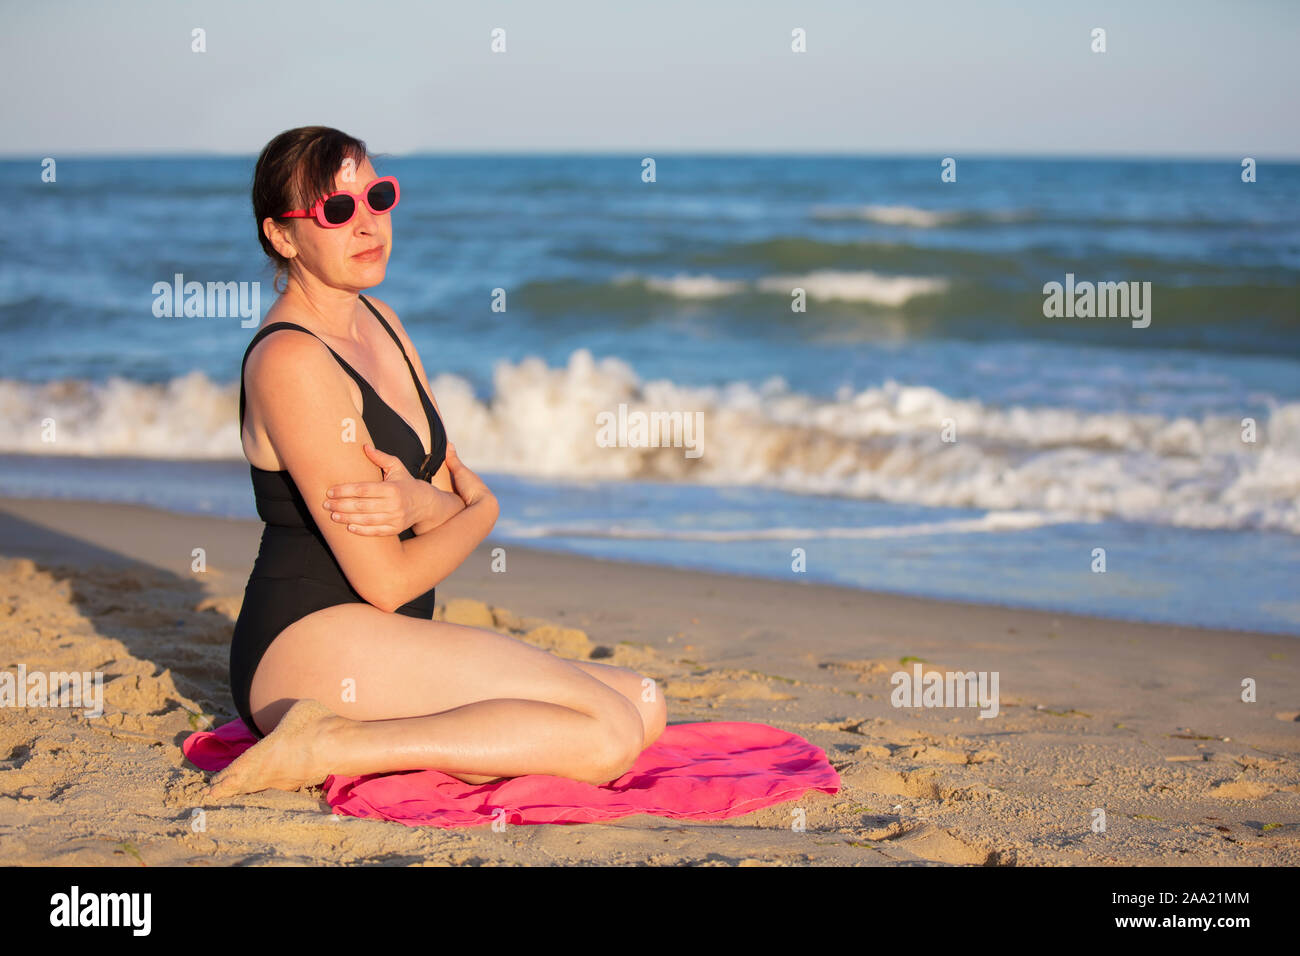 Mature swimsuit pics Mature Woman And Swimsuit High Resolution Stock Photography And Images Alamy